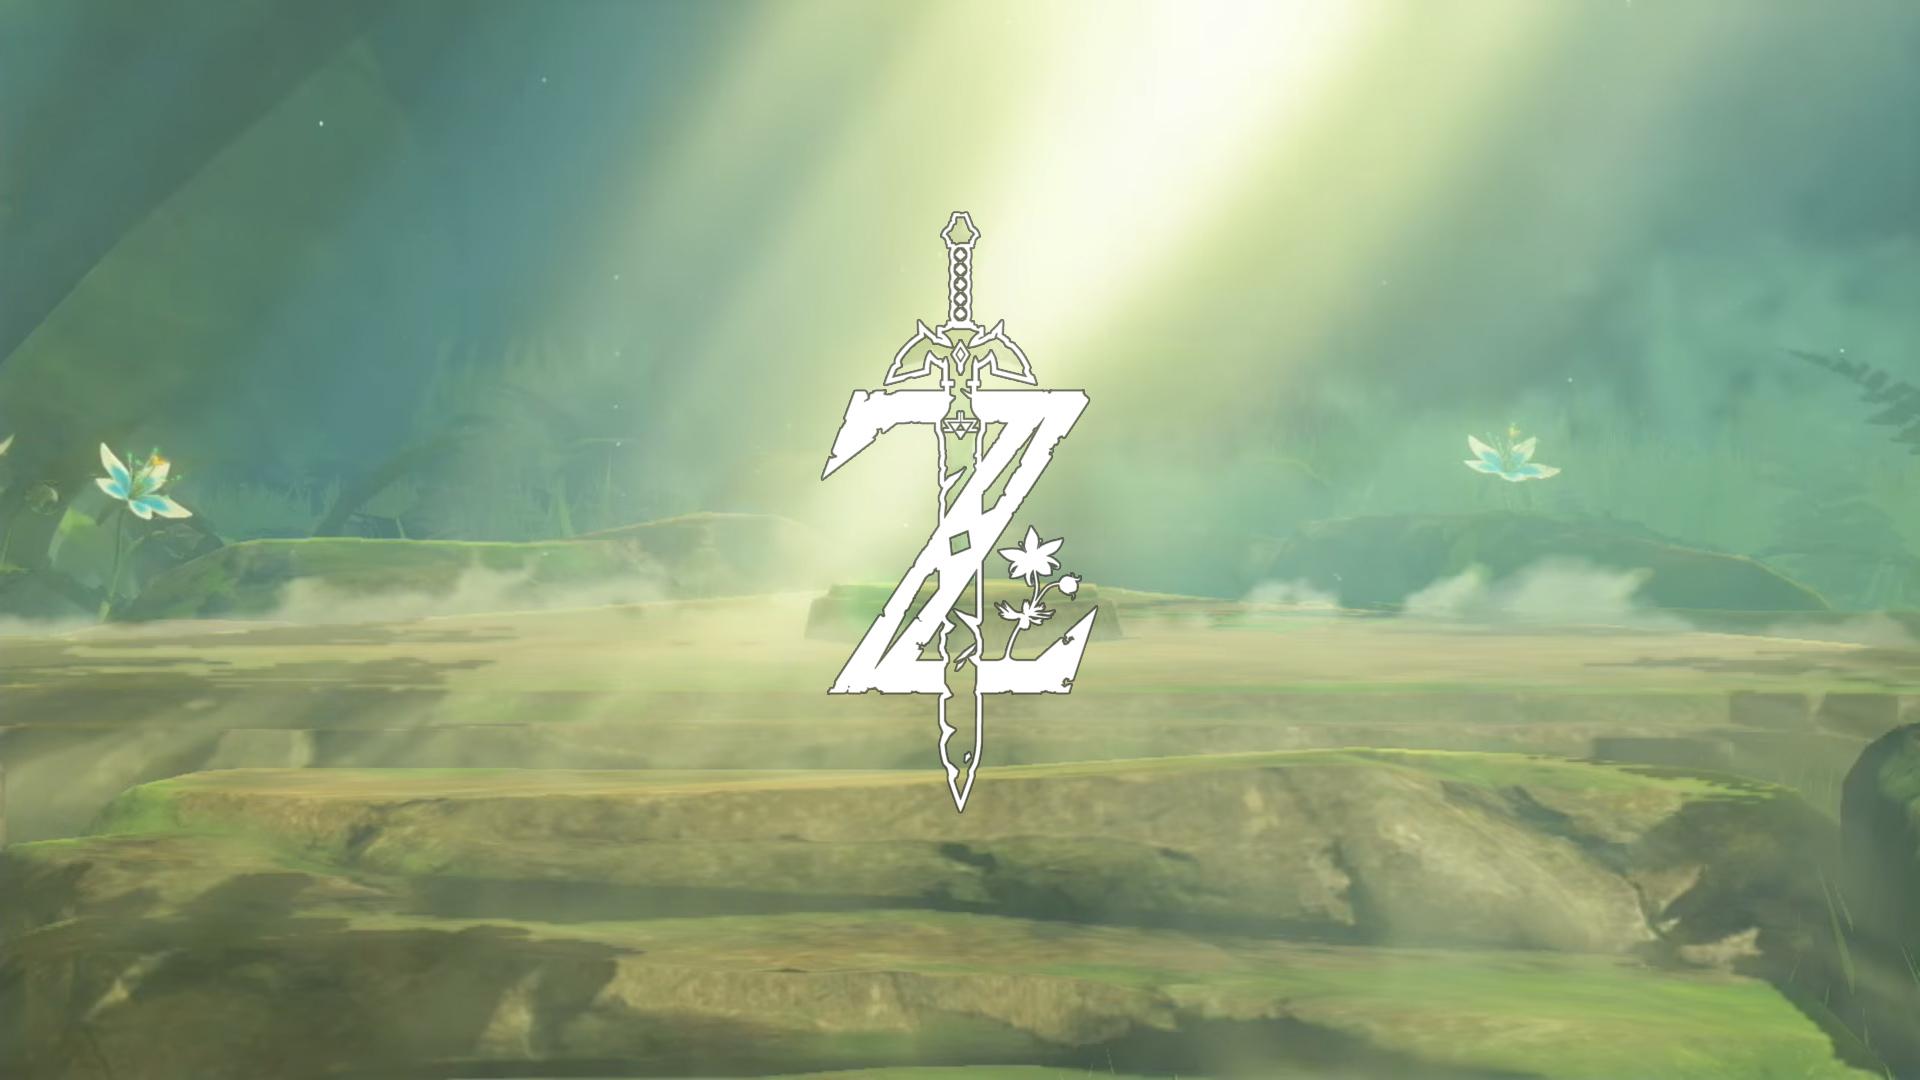 The Legend Of Zelda: Breath Of The Wild Wallpaper, Picture, Image